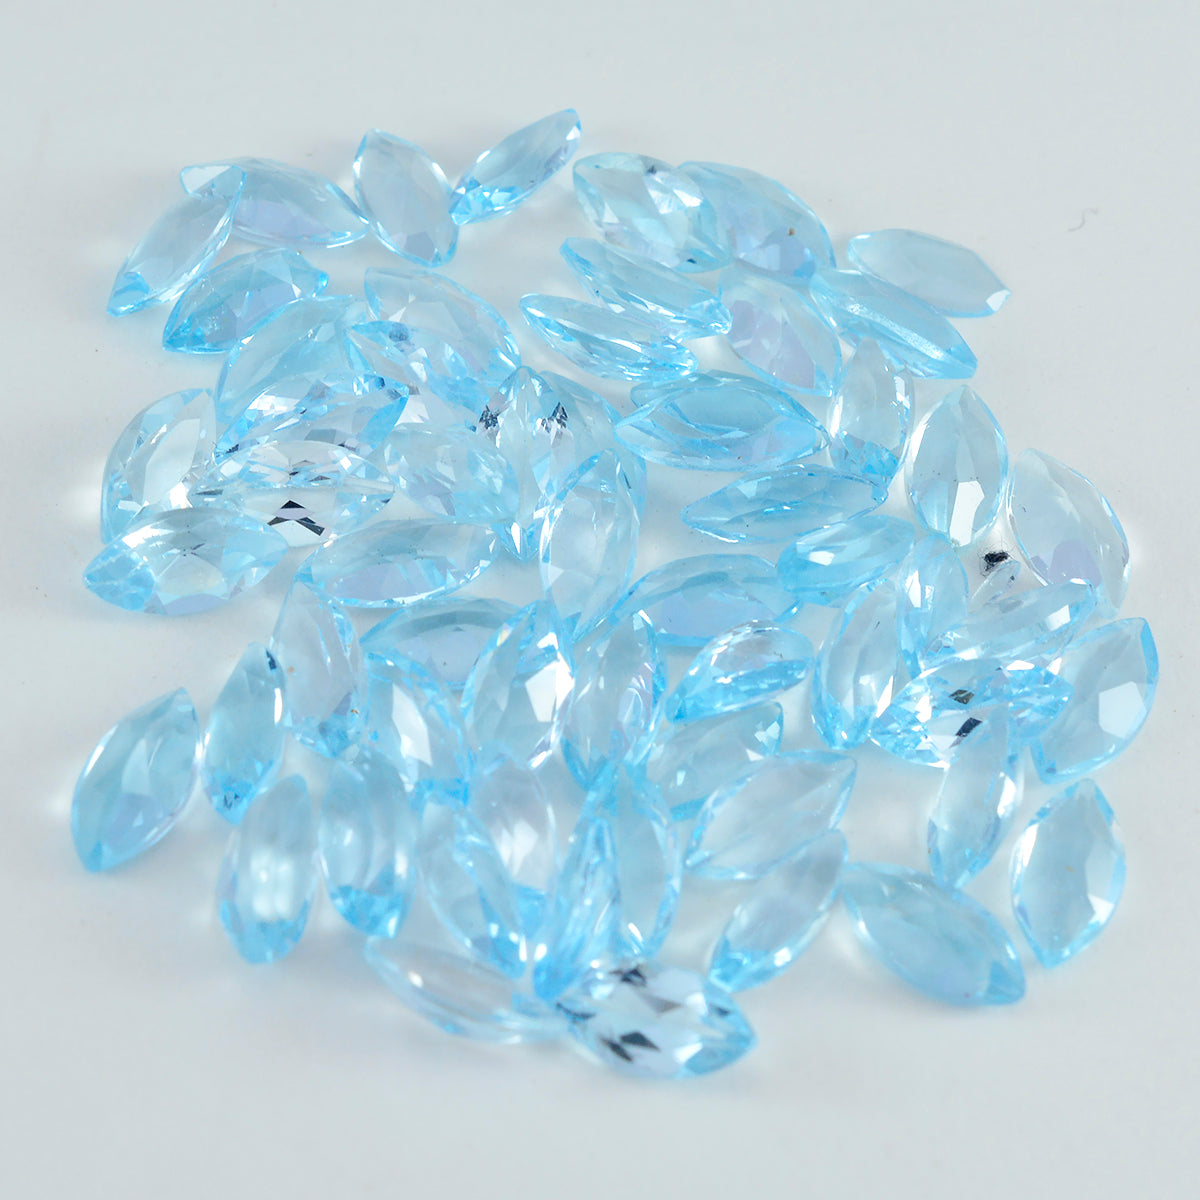 Riyogems 1PC Real Blue Topaz Faceted 3x6 mm Marquise Shape sweet Quality Gem